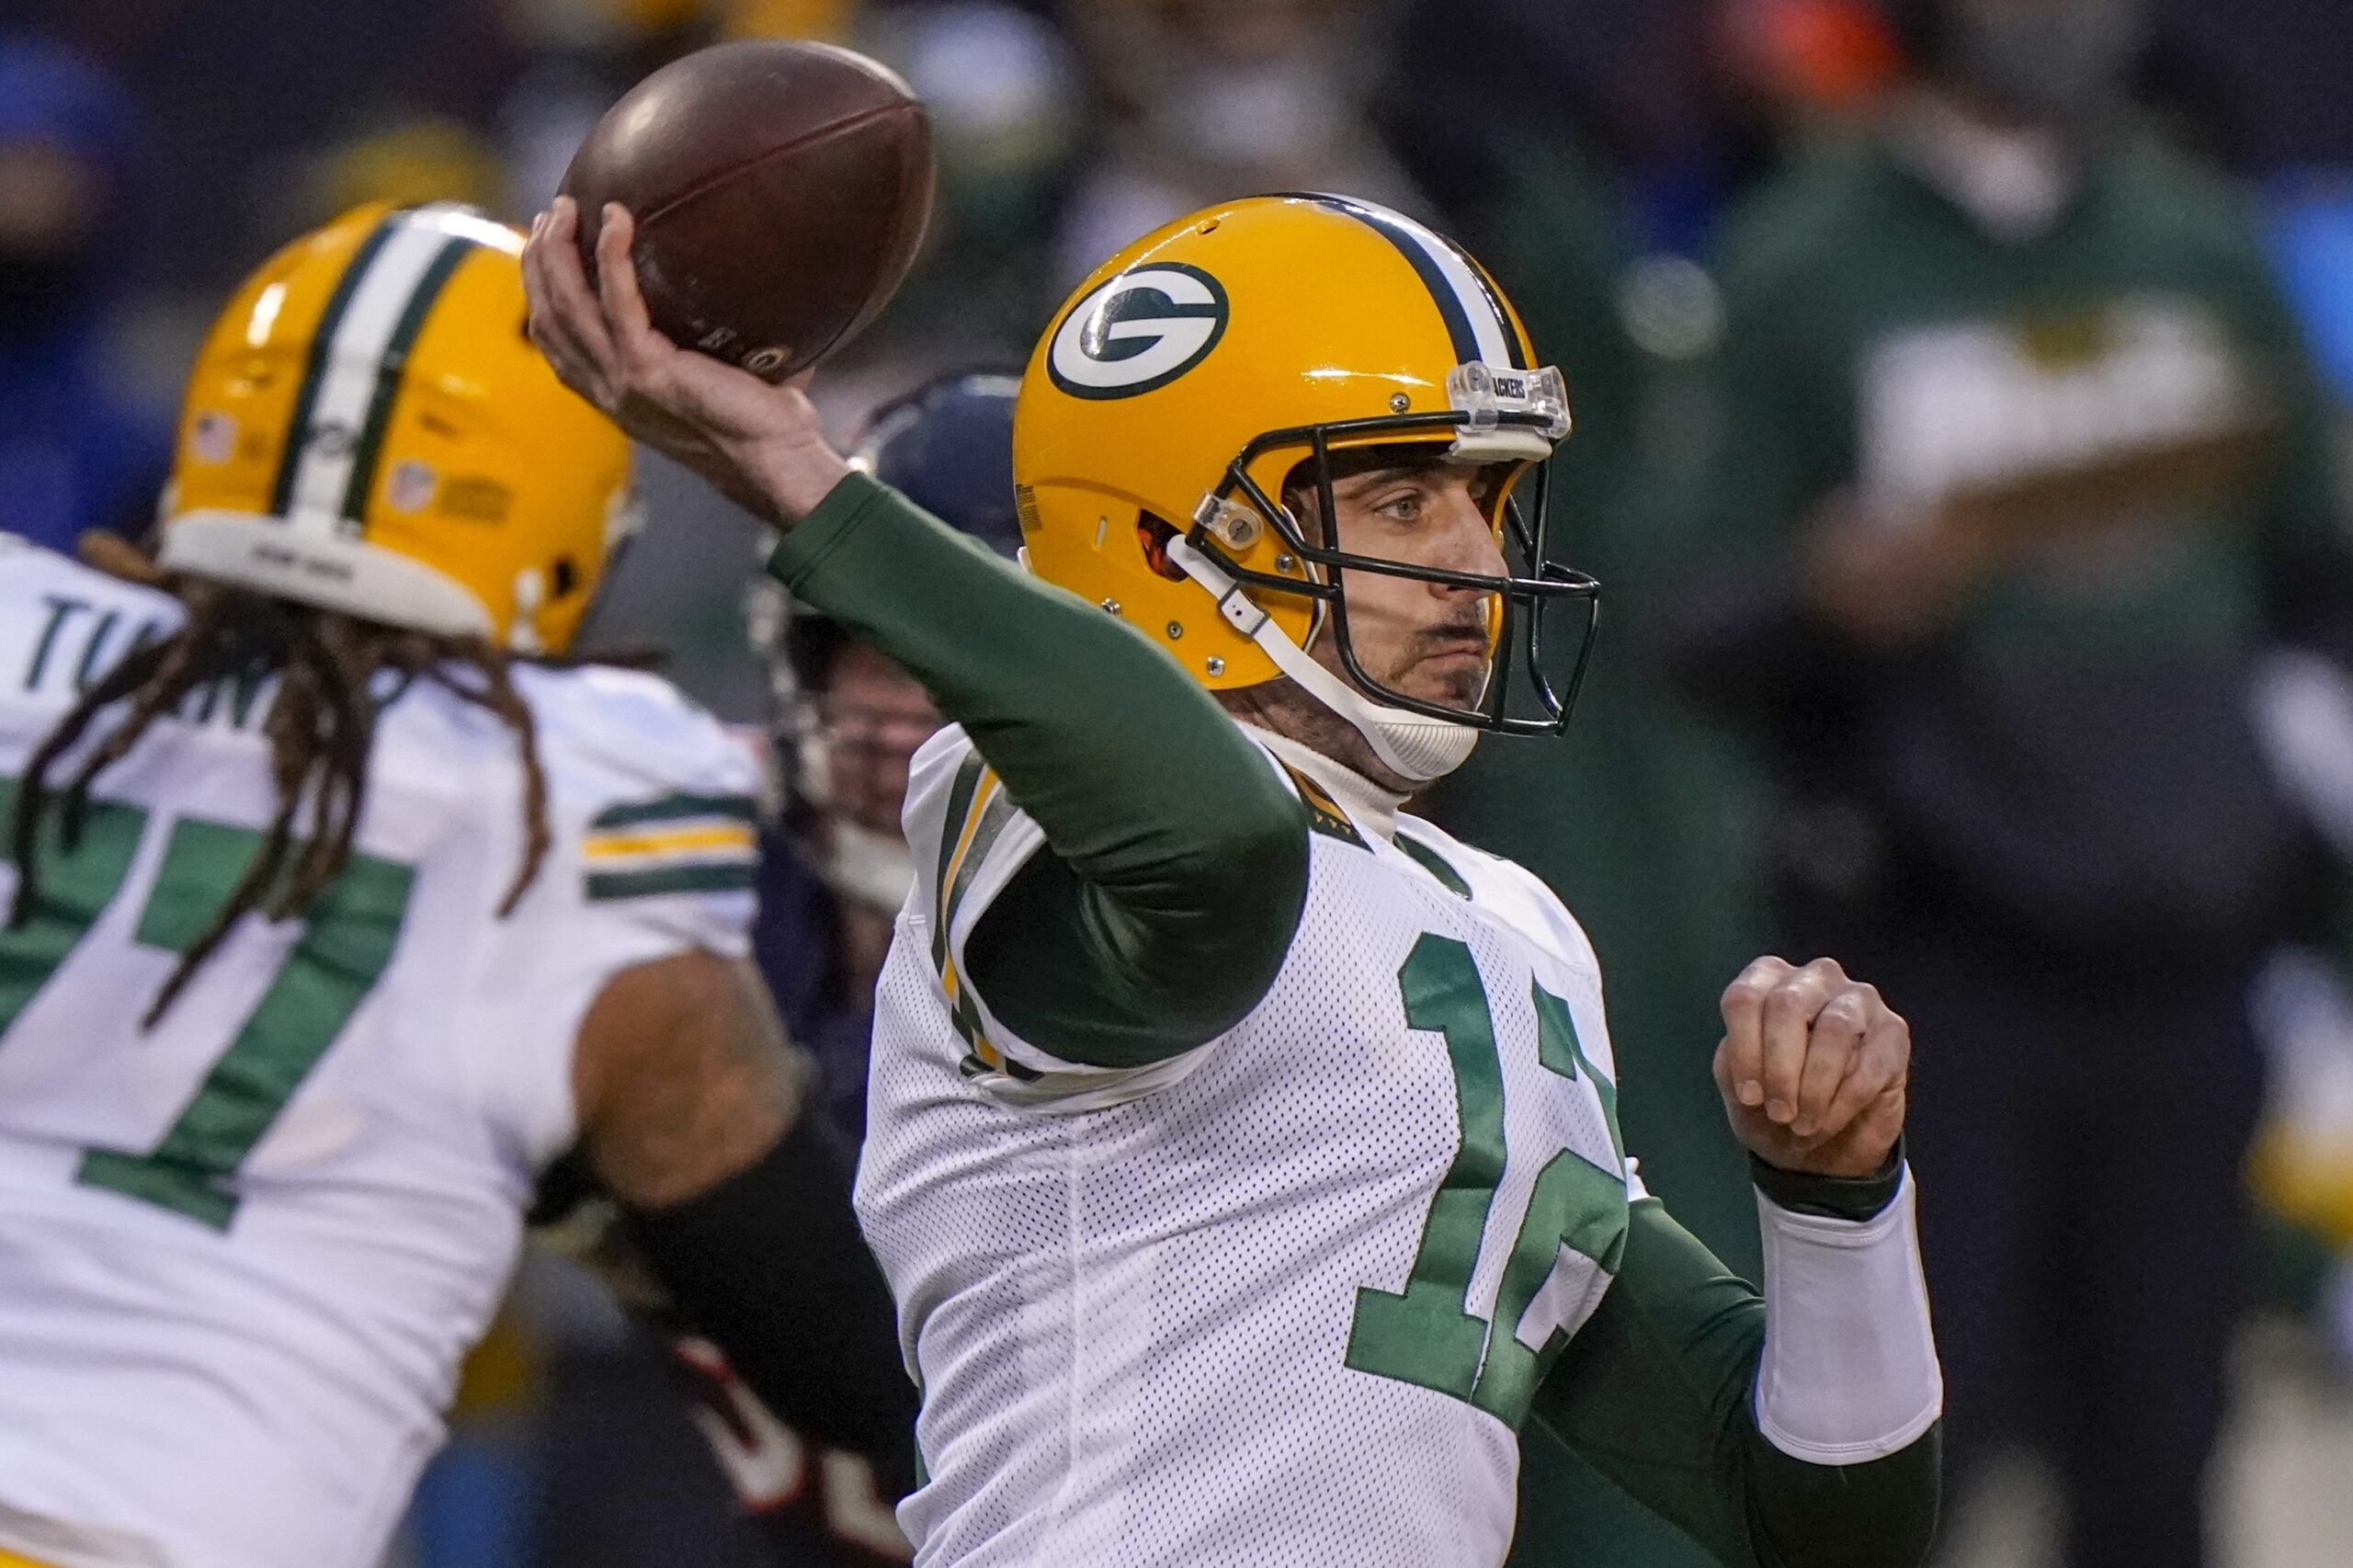 Aaron Rodgers throws a pass against the Chicago Bears